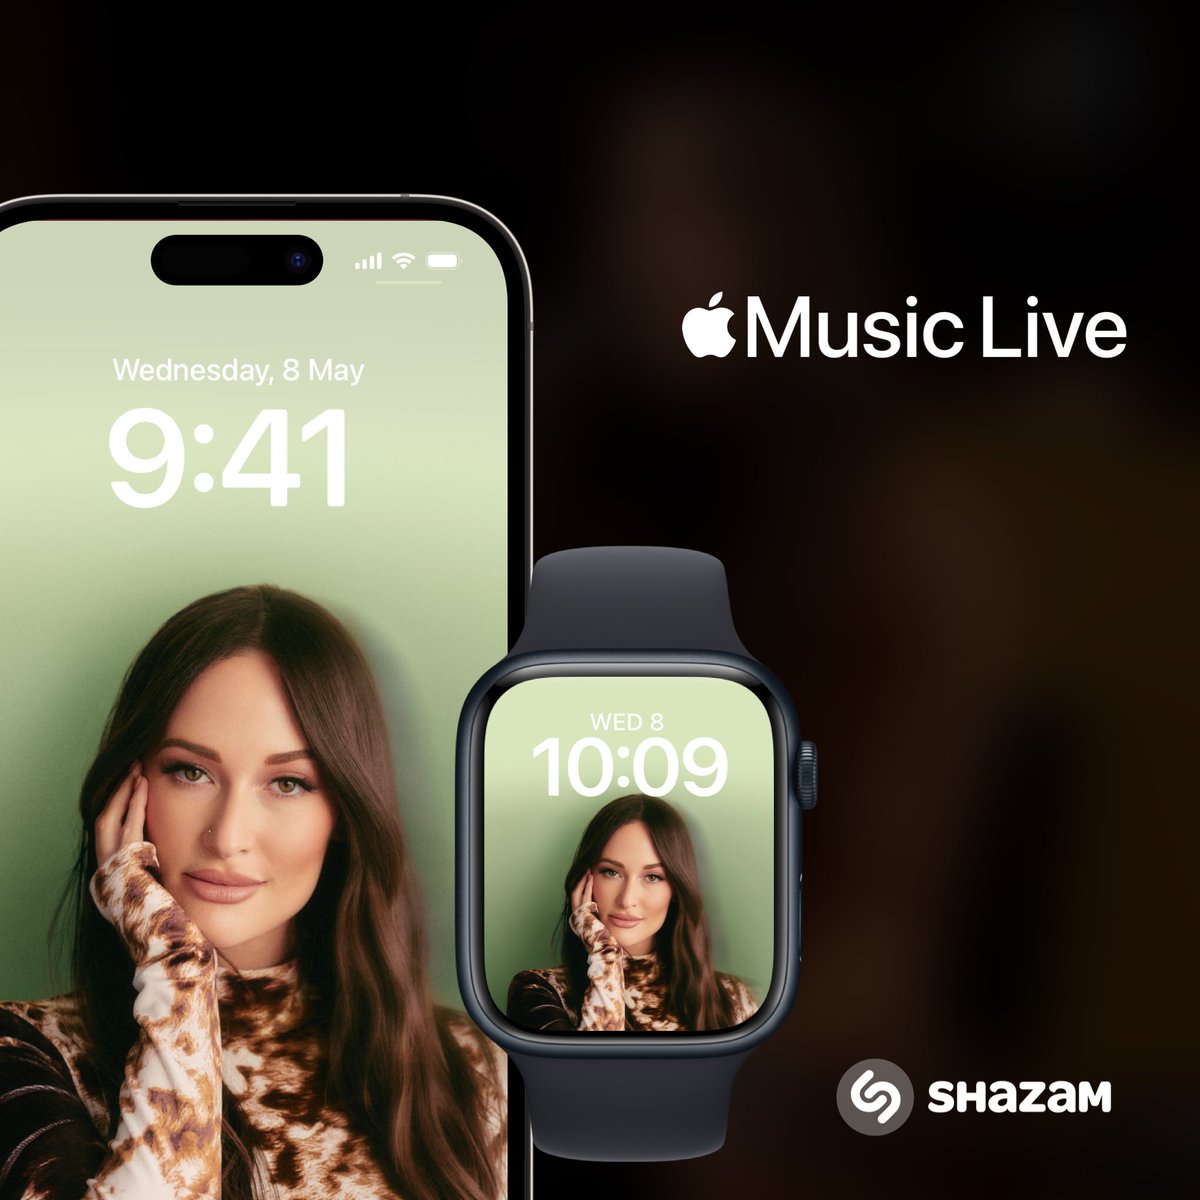 .@KaceyMusgraves is hitting the #AppleMusicLive stage soon! Download wallpapers for your phone and save the concert to unlock bonus content after the show: apple.co/KaceyMusgraves…